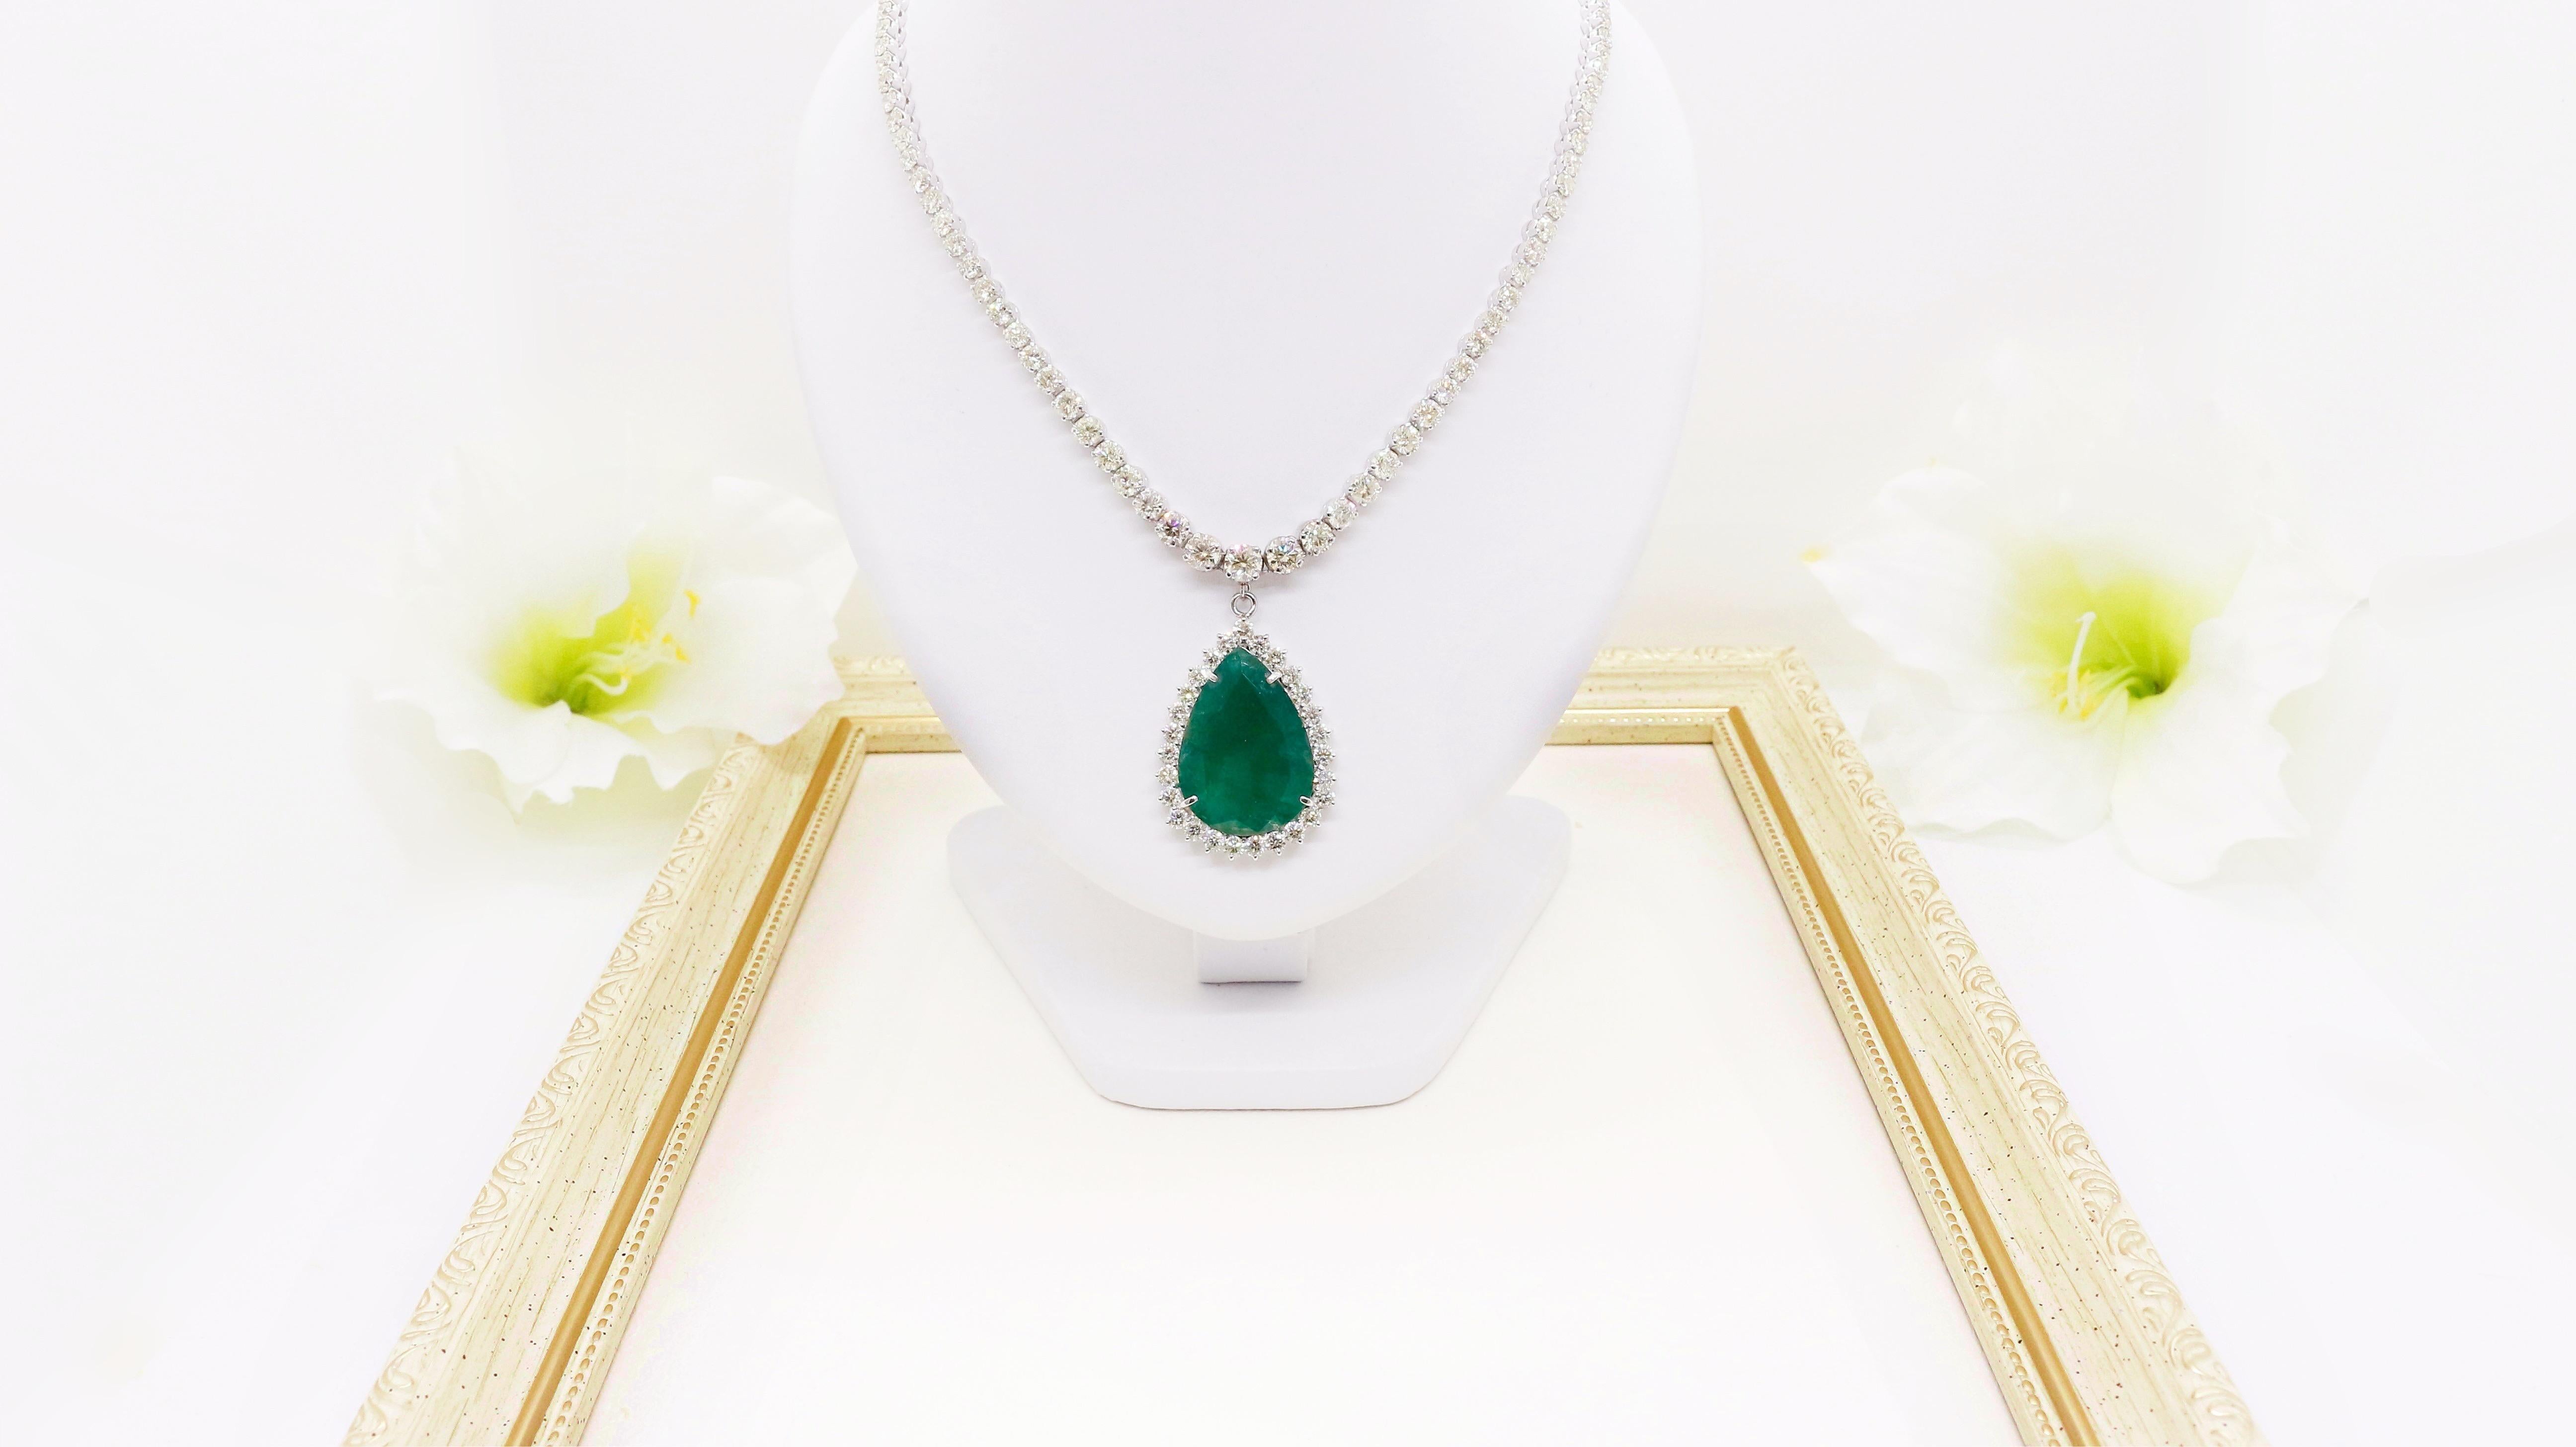 *39 Carat Emerald and Diamond Necklace in 18kt Gold for an Unforgettable Style Statement*

Emerald weight: 39.92 carat - This exquisite necklace features a stunning emerald gemstone, weighing a remarkable 39.92 carats. The emerald is of exceptional